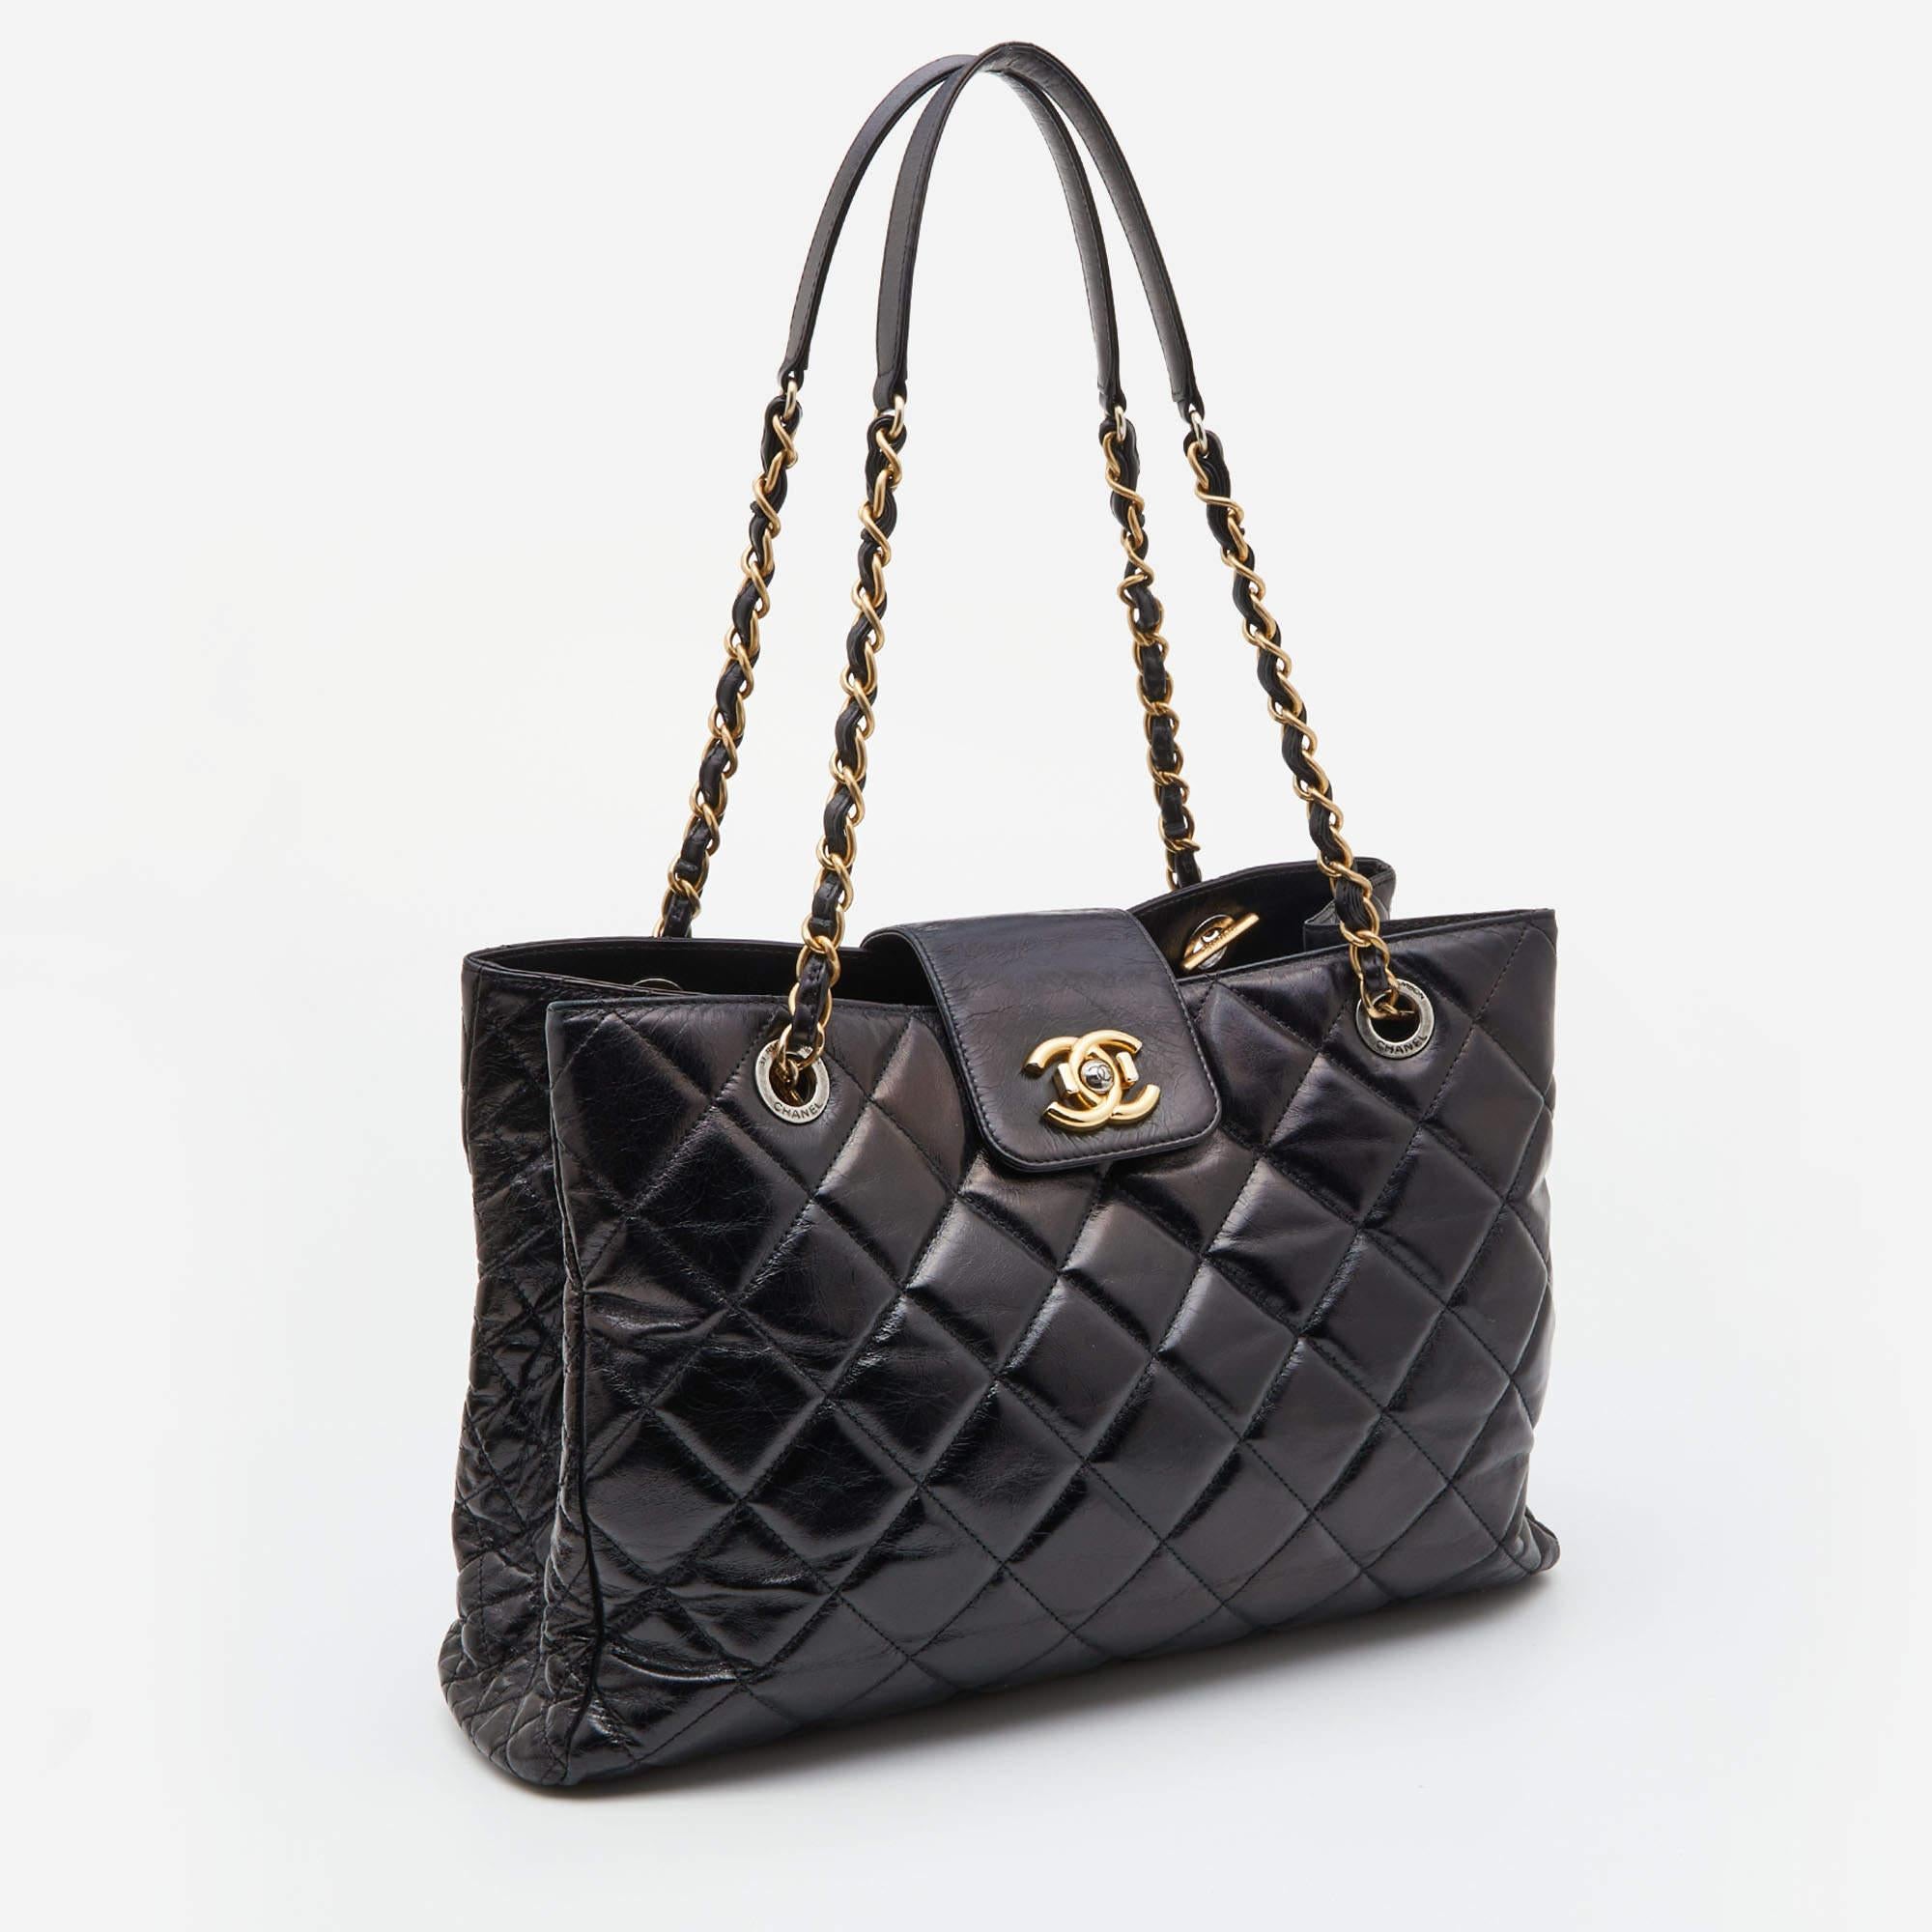 Women's Chanel Black Quilted Aged Leather CC Chain Tote